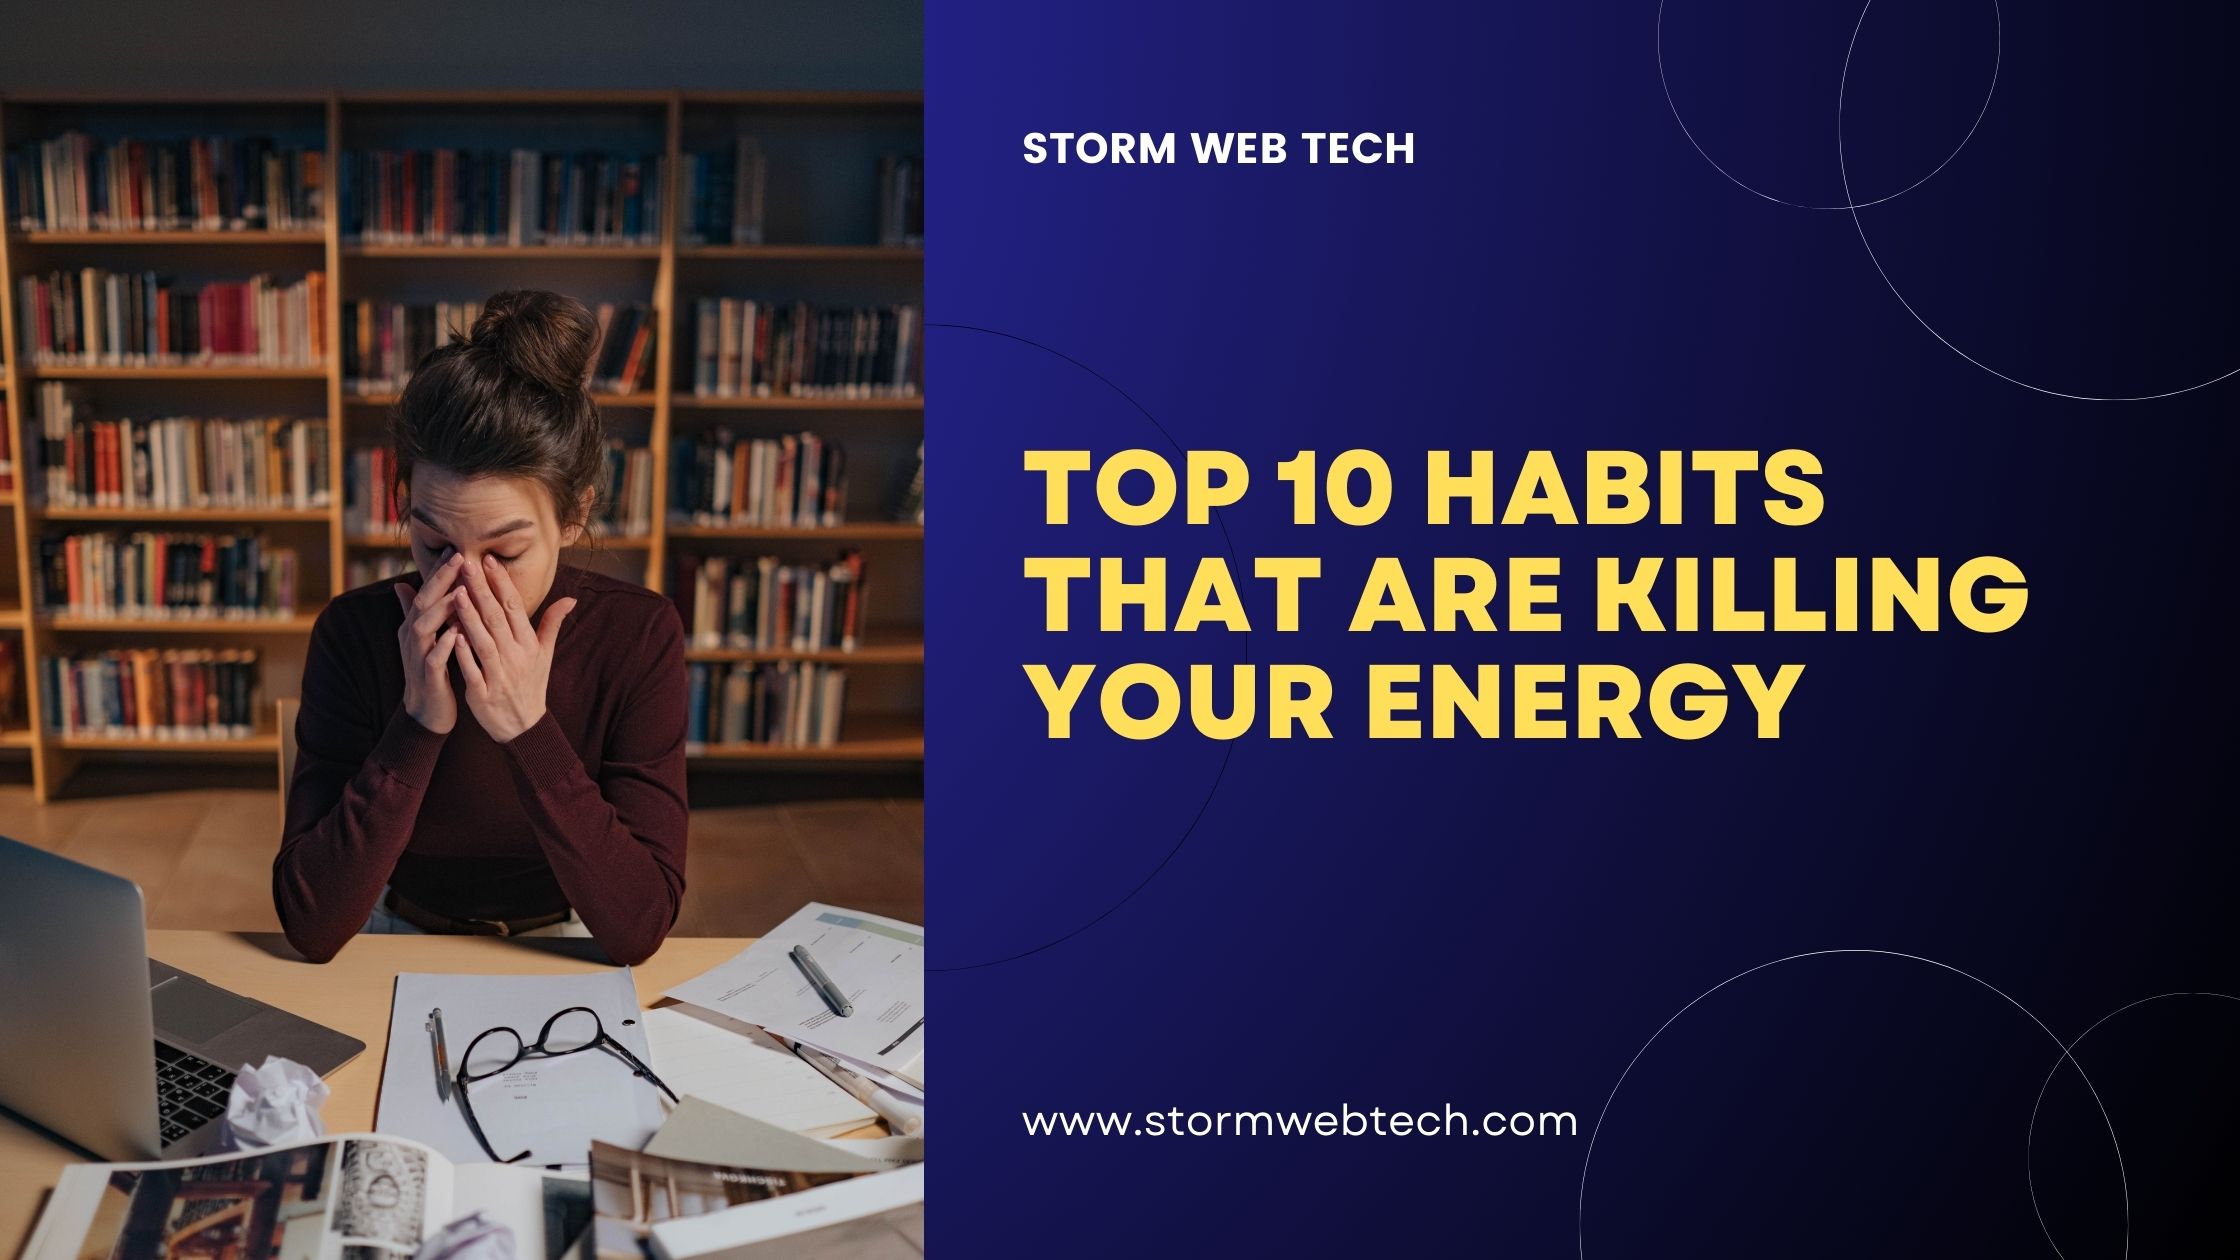 the top 10 habits that are killing your energy and offer insights on how to break free from them.